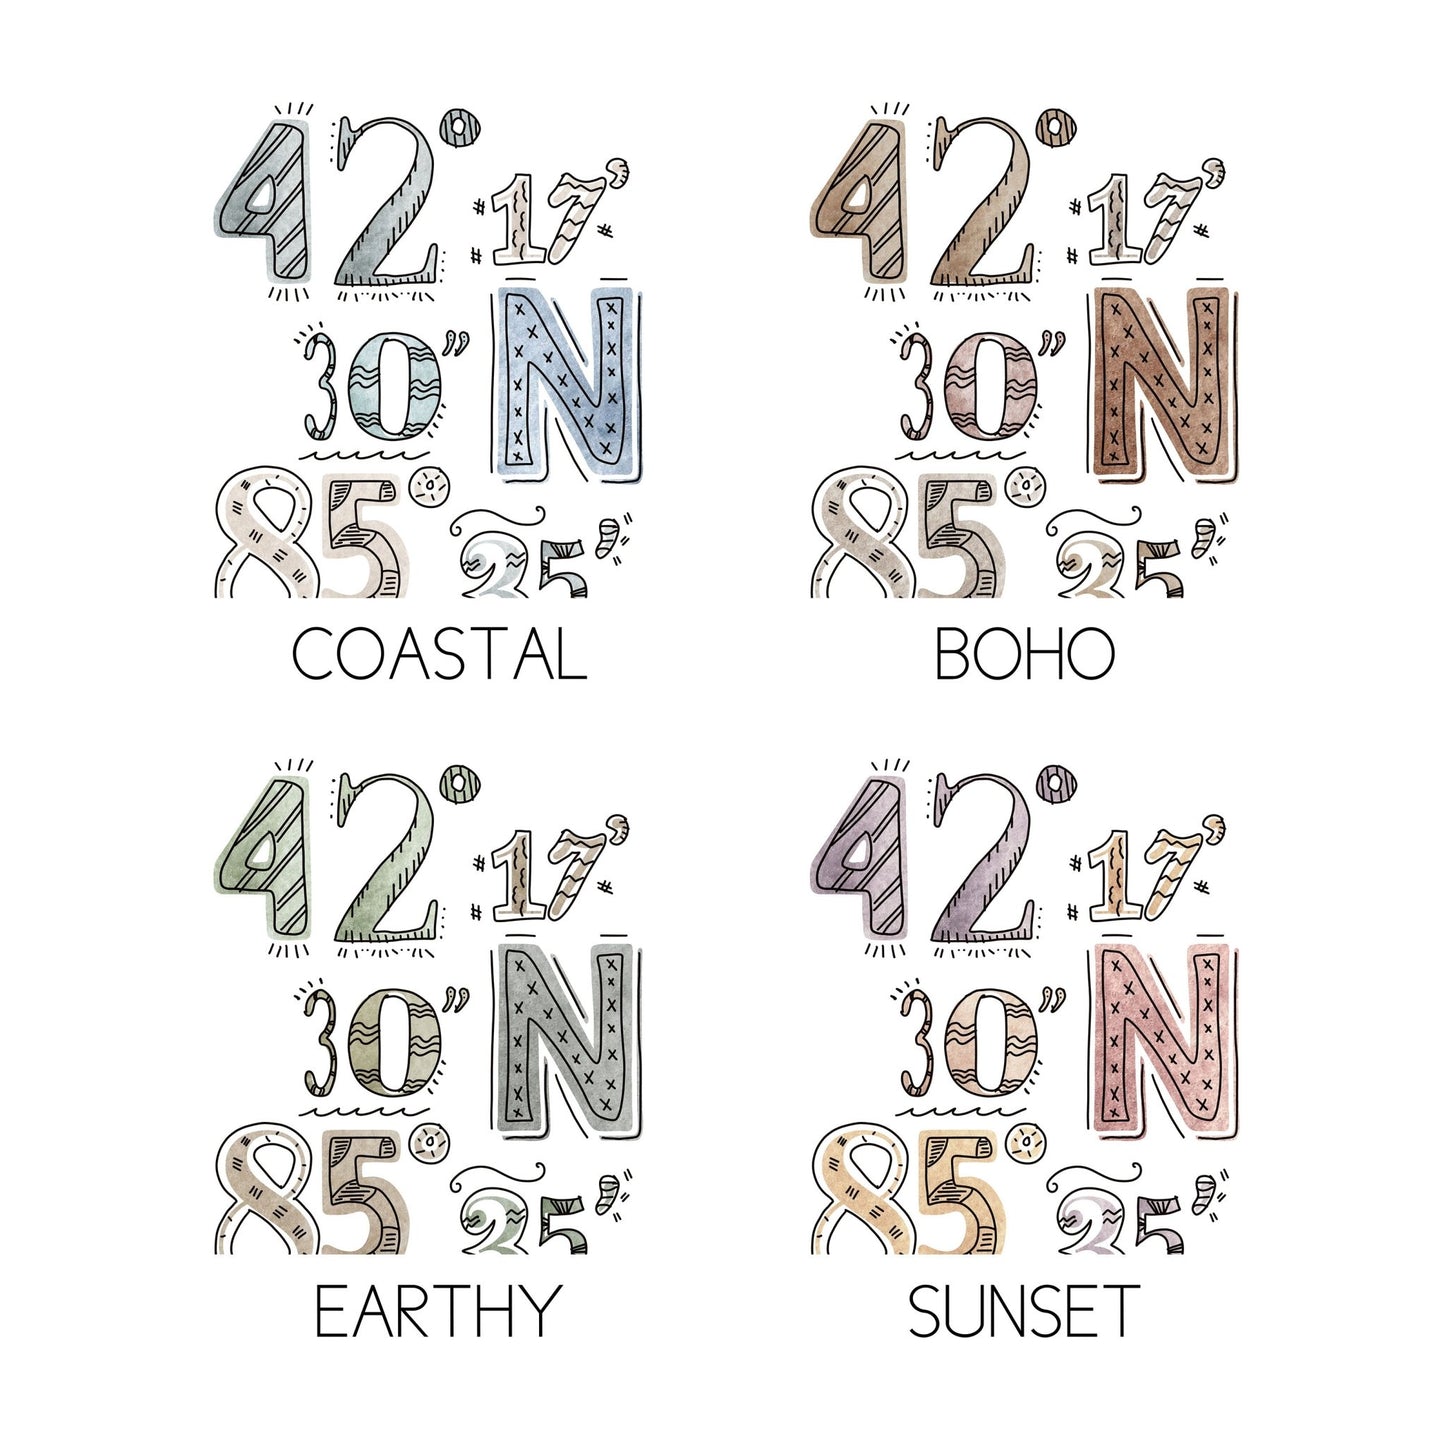 Examples of all four colors available for city art coasters: coastal, sunset, earthy, boho